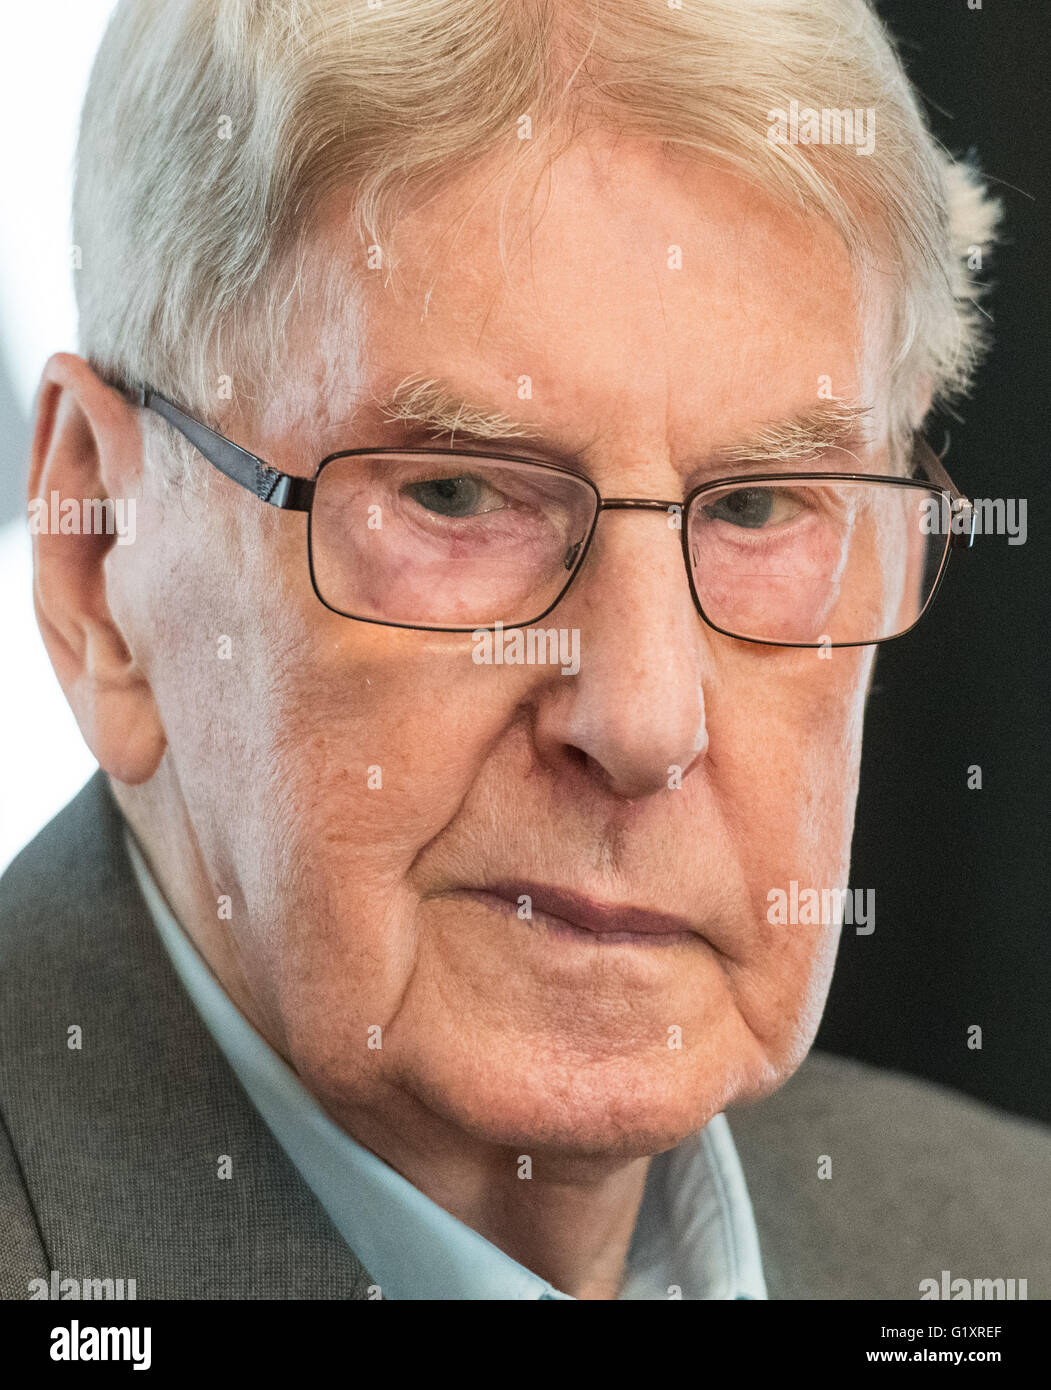 Detmold, Germany. 20th May, 2016. Defendant Reinhold Hanning attends a session of the trial against him, in Detmold, Germany, 20 May 2016. The 94-year-old World War II SS guard is facing a charge of being an accessory to at least 170,000 murders at Auschwitz concentration camp. Prosecutors state that he was a member of the SS 'Totenkopf' (Death's Head) Division and that he was stationed at the Nazi regime's death camp between early 1943 and June 1944. Photo: BERND THISSEN/dpa/Alamy Live News Stock Photo